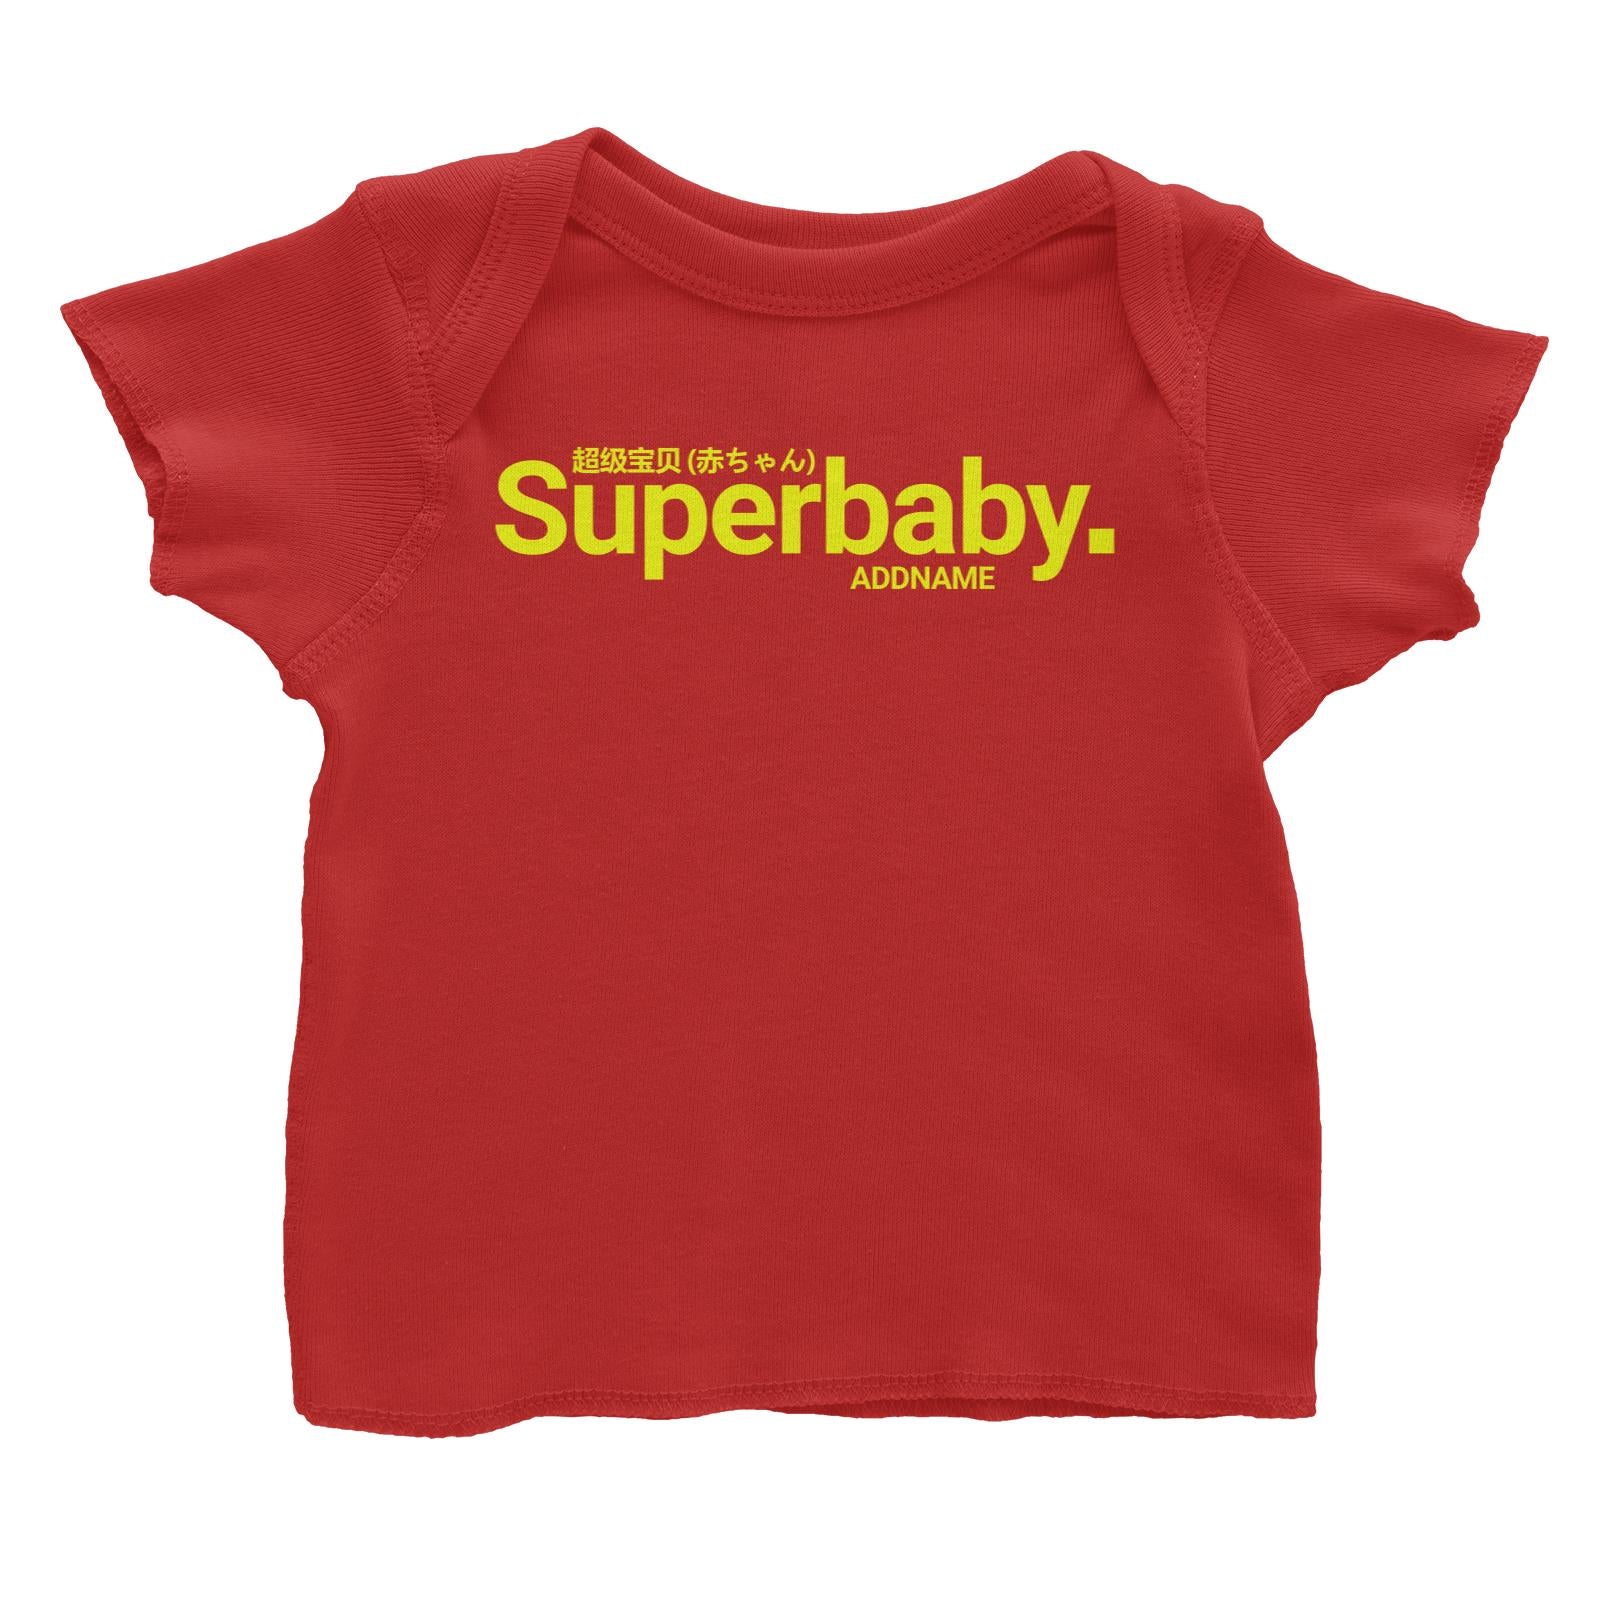 Streetwear Superbaby Addname Baby T-Shirt